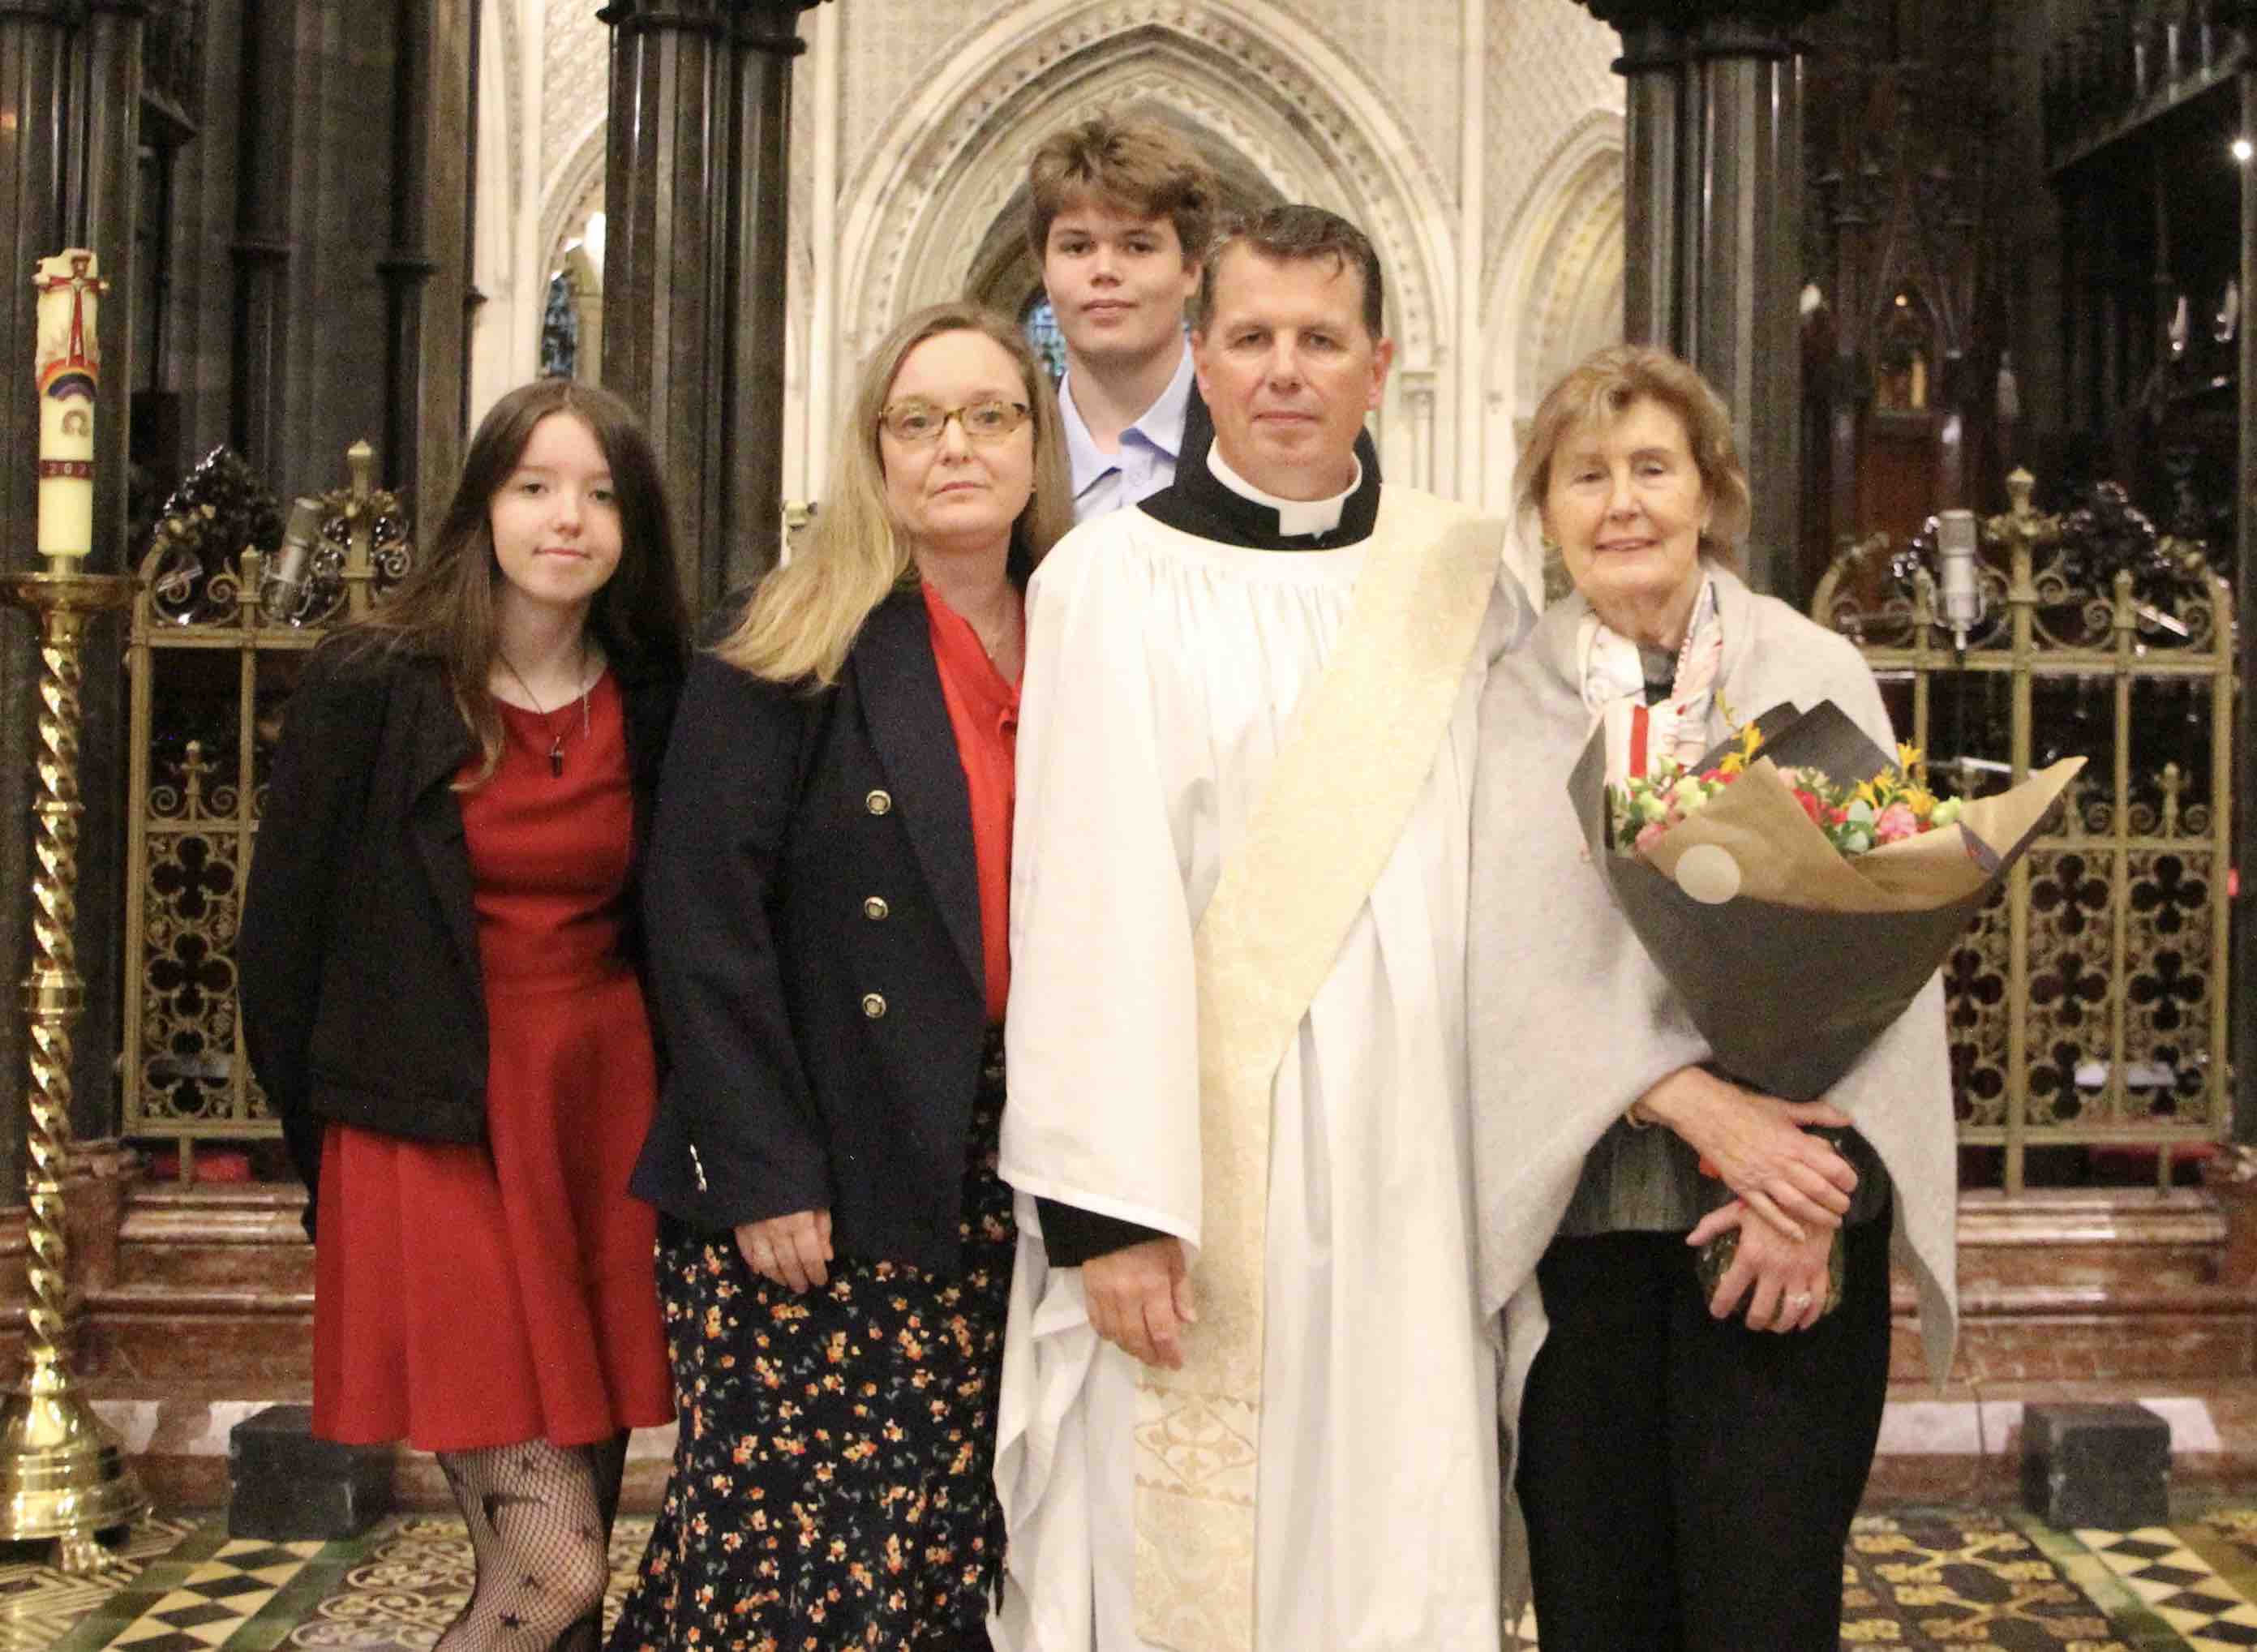 The Revd Mathew McCauley with his family.